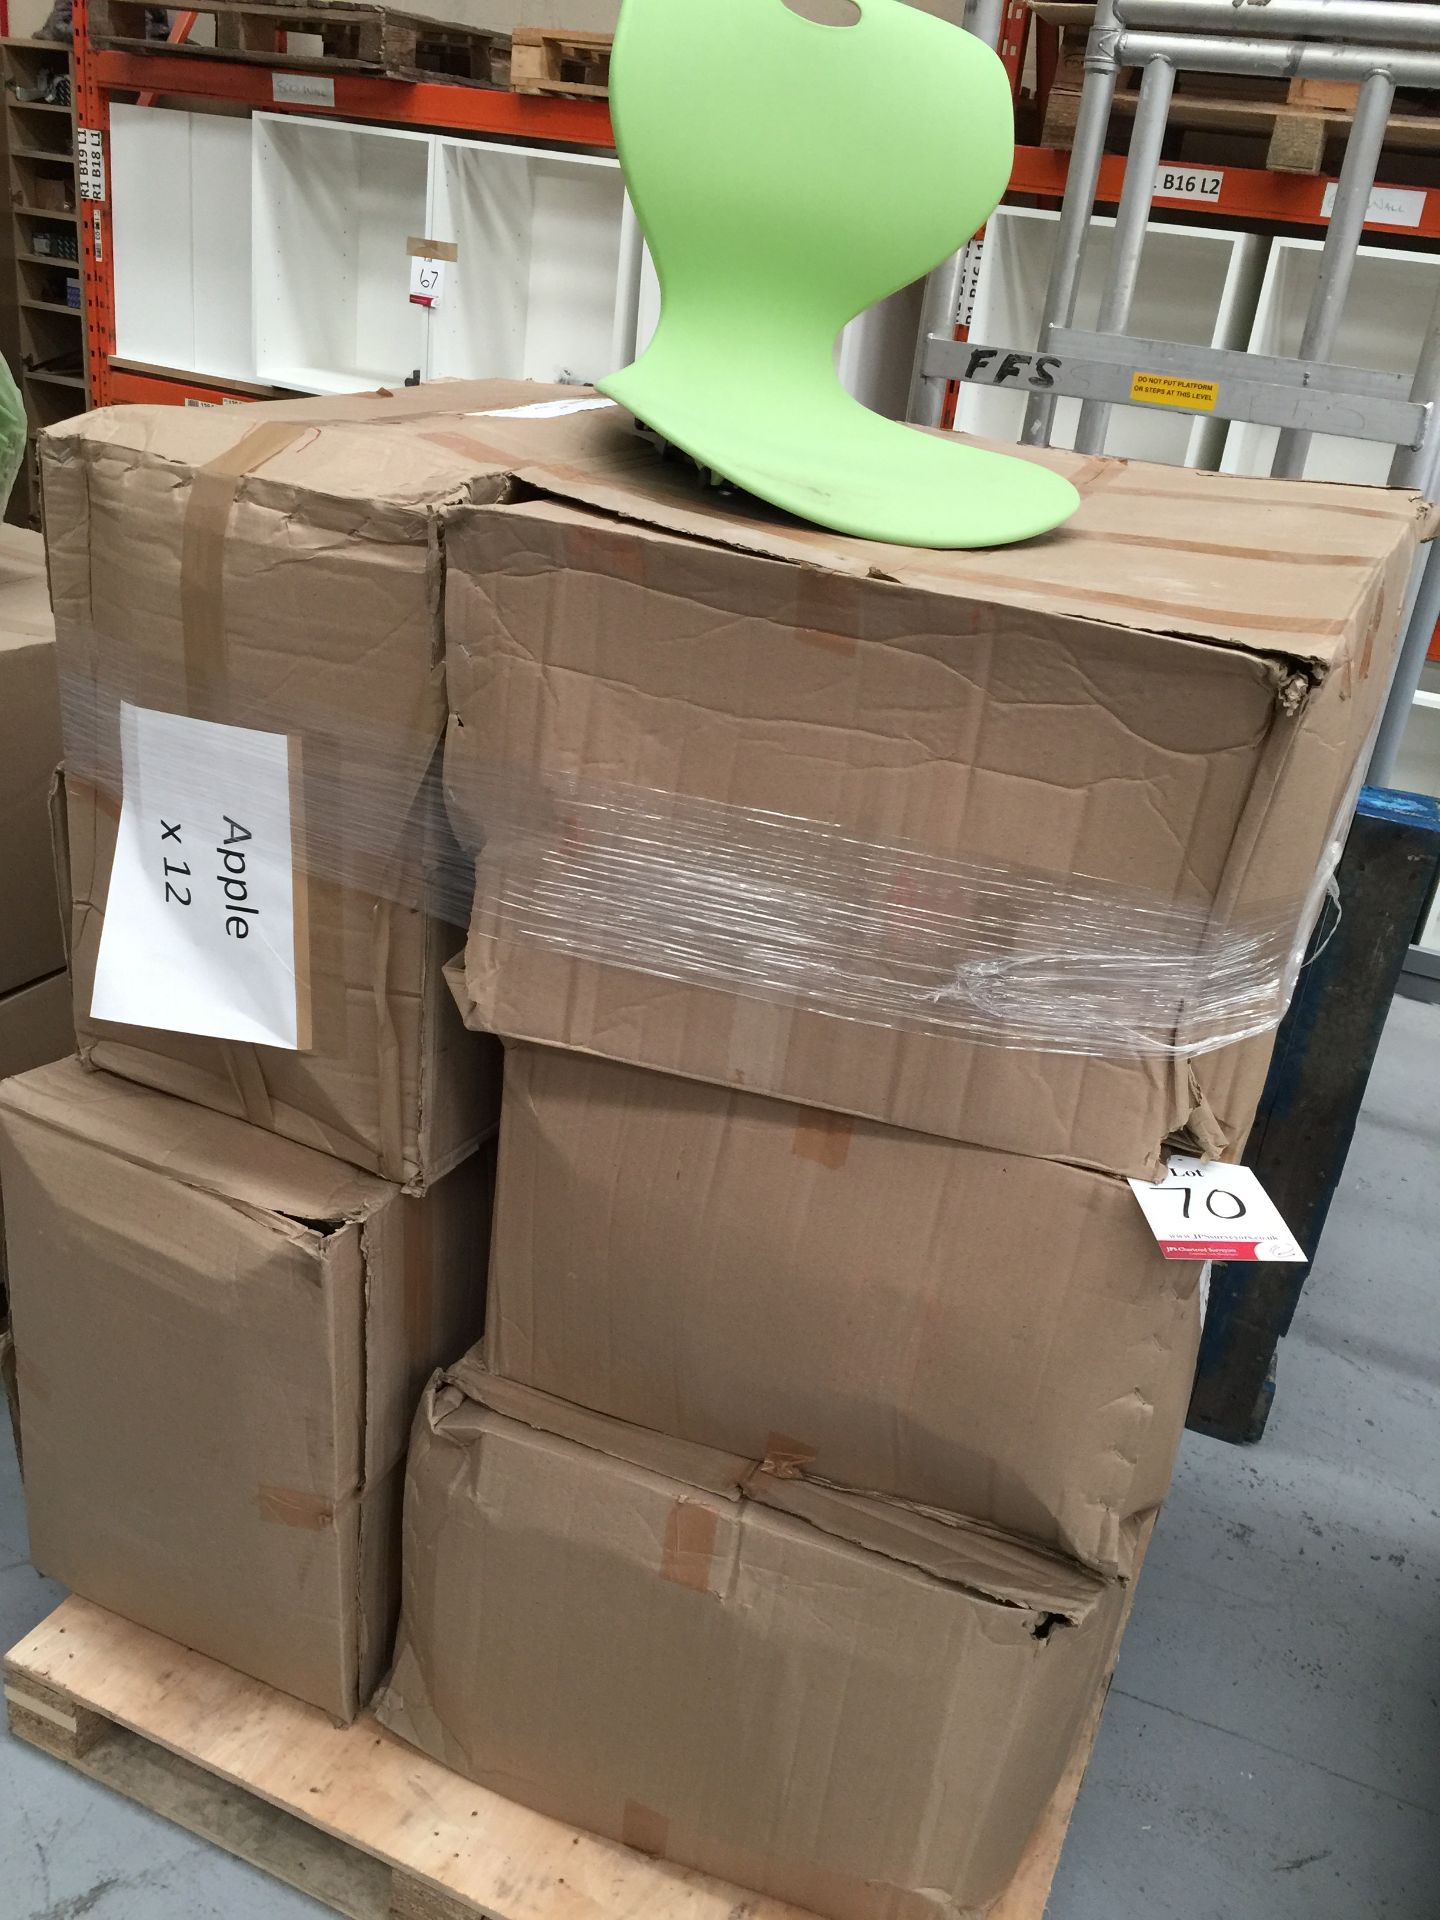 60 Chair Shells (5 boxes) - Apple